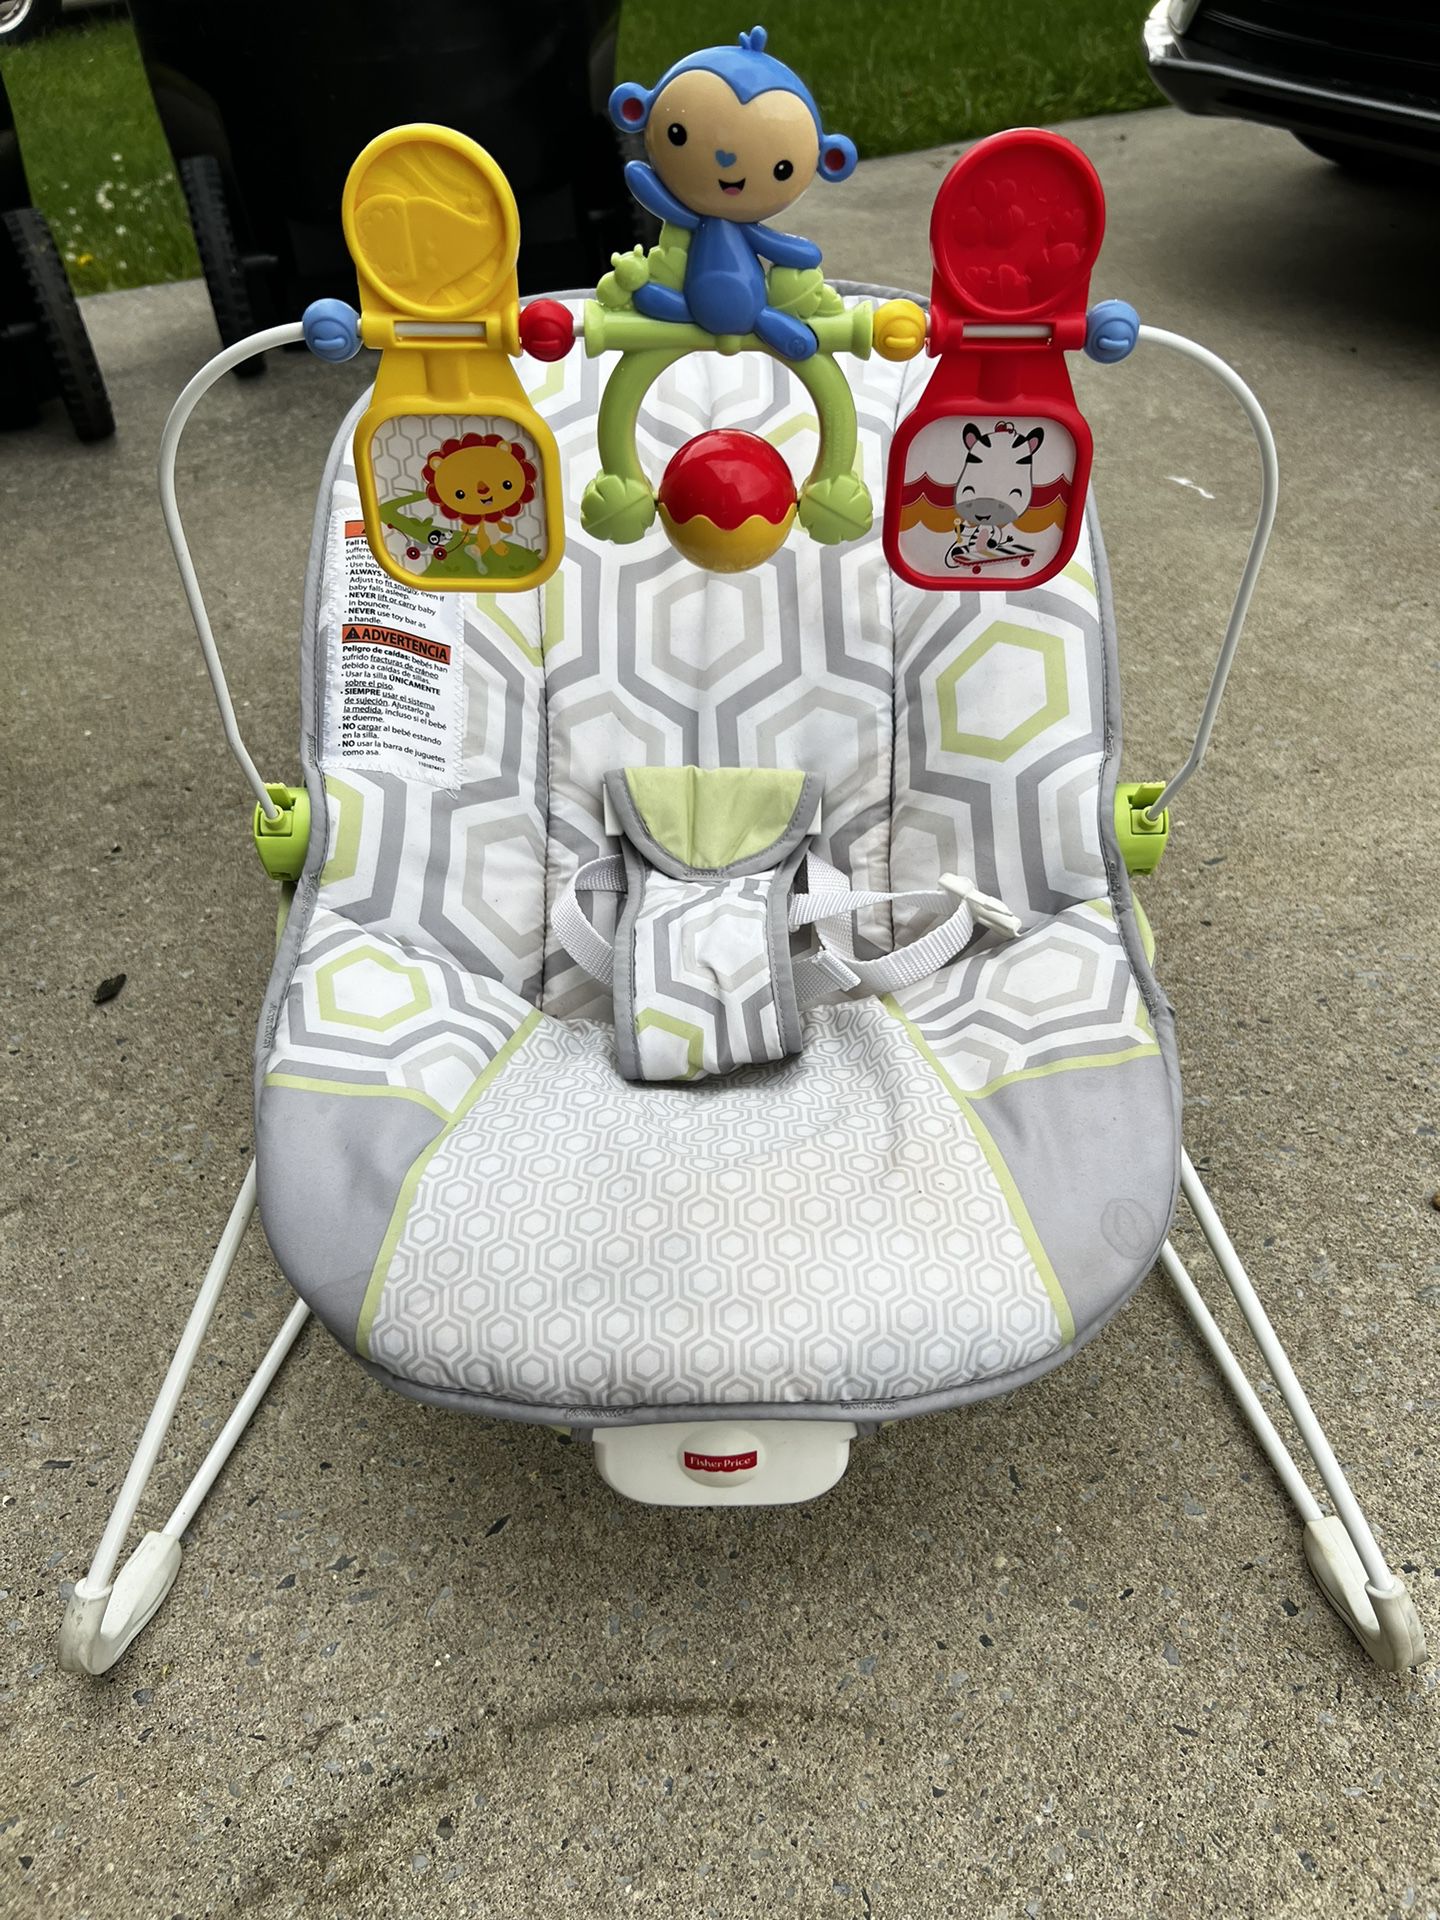 Baby Seat With Vibration 